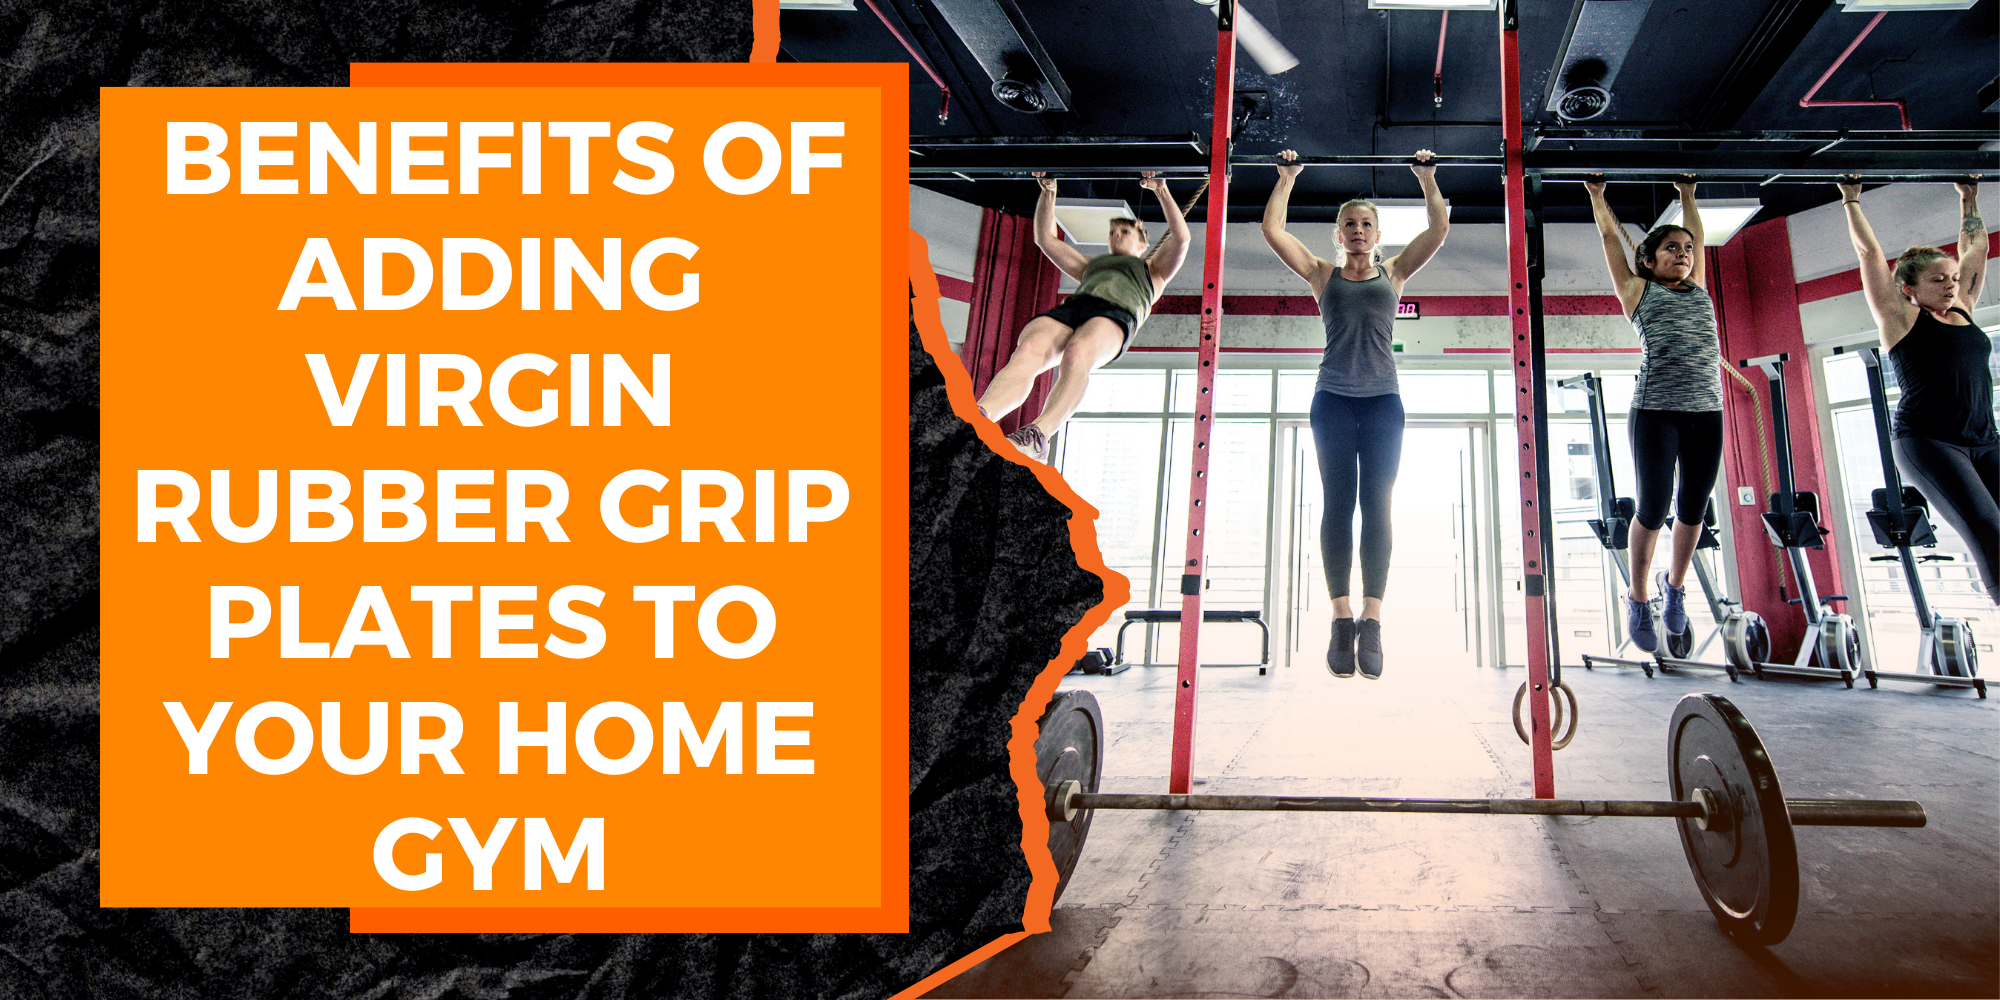 The Benefits of Adding Virgin Rubber Grip Plates to Your Home Gym